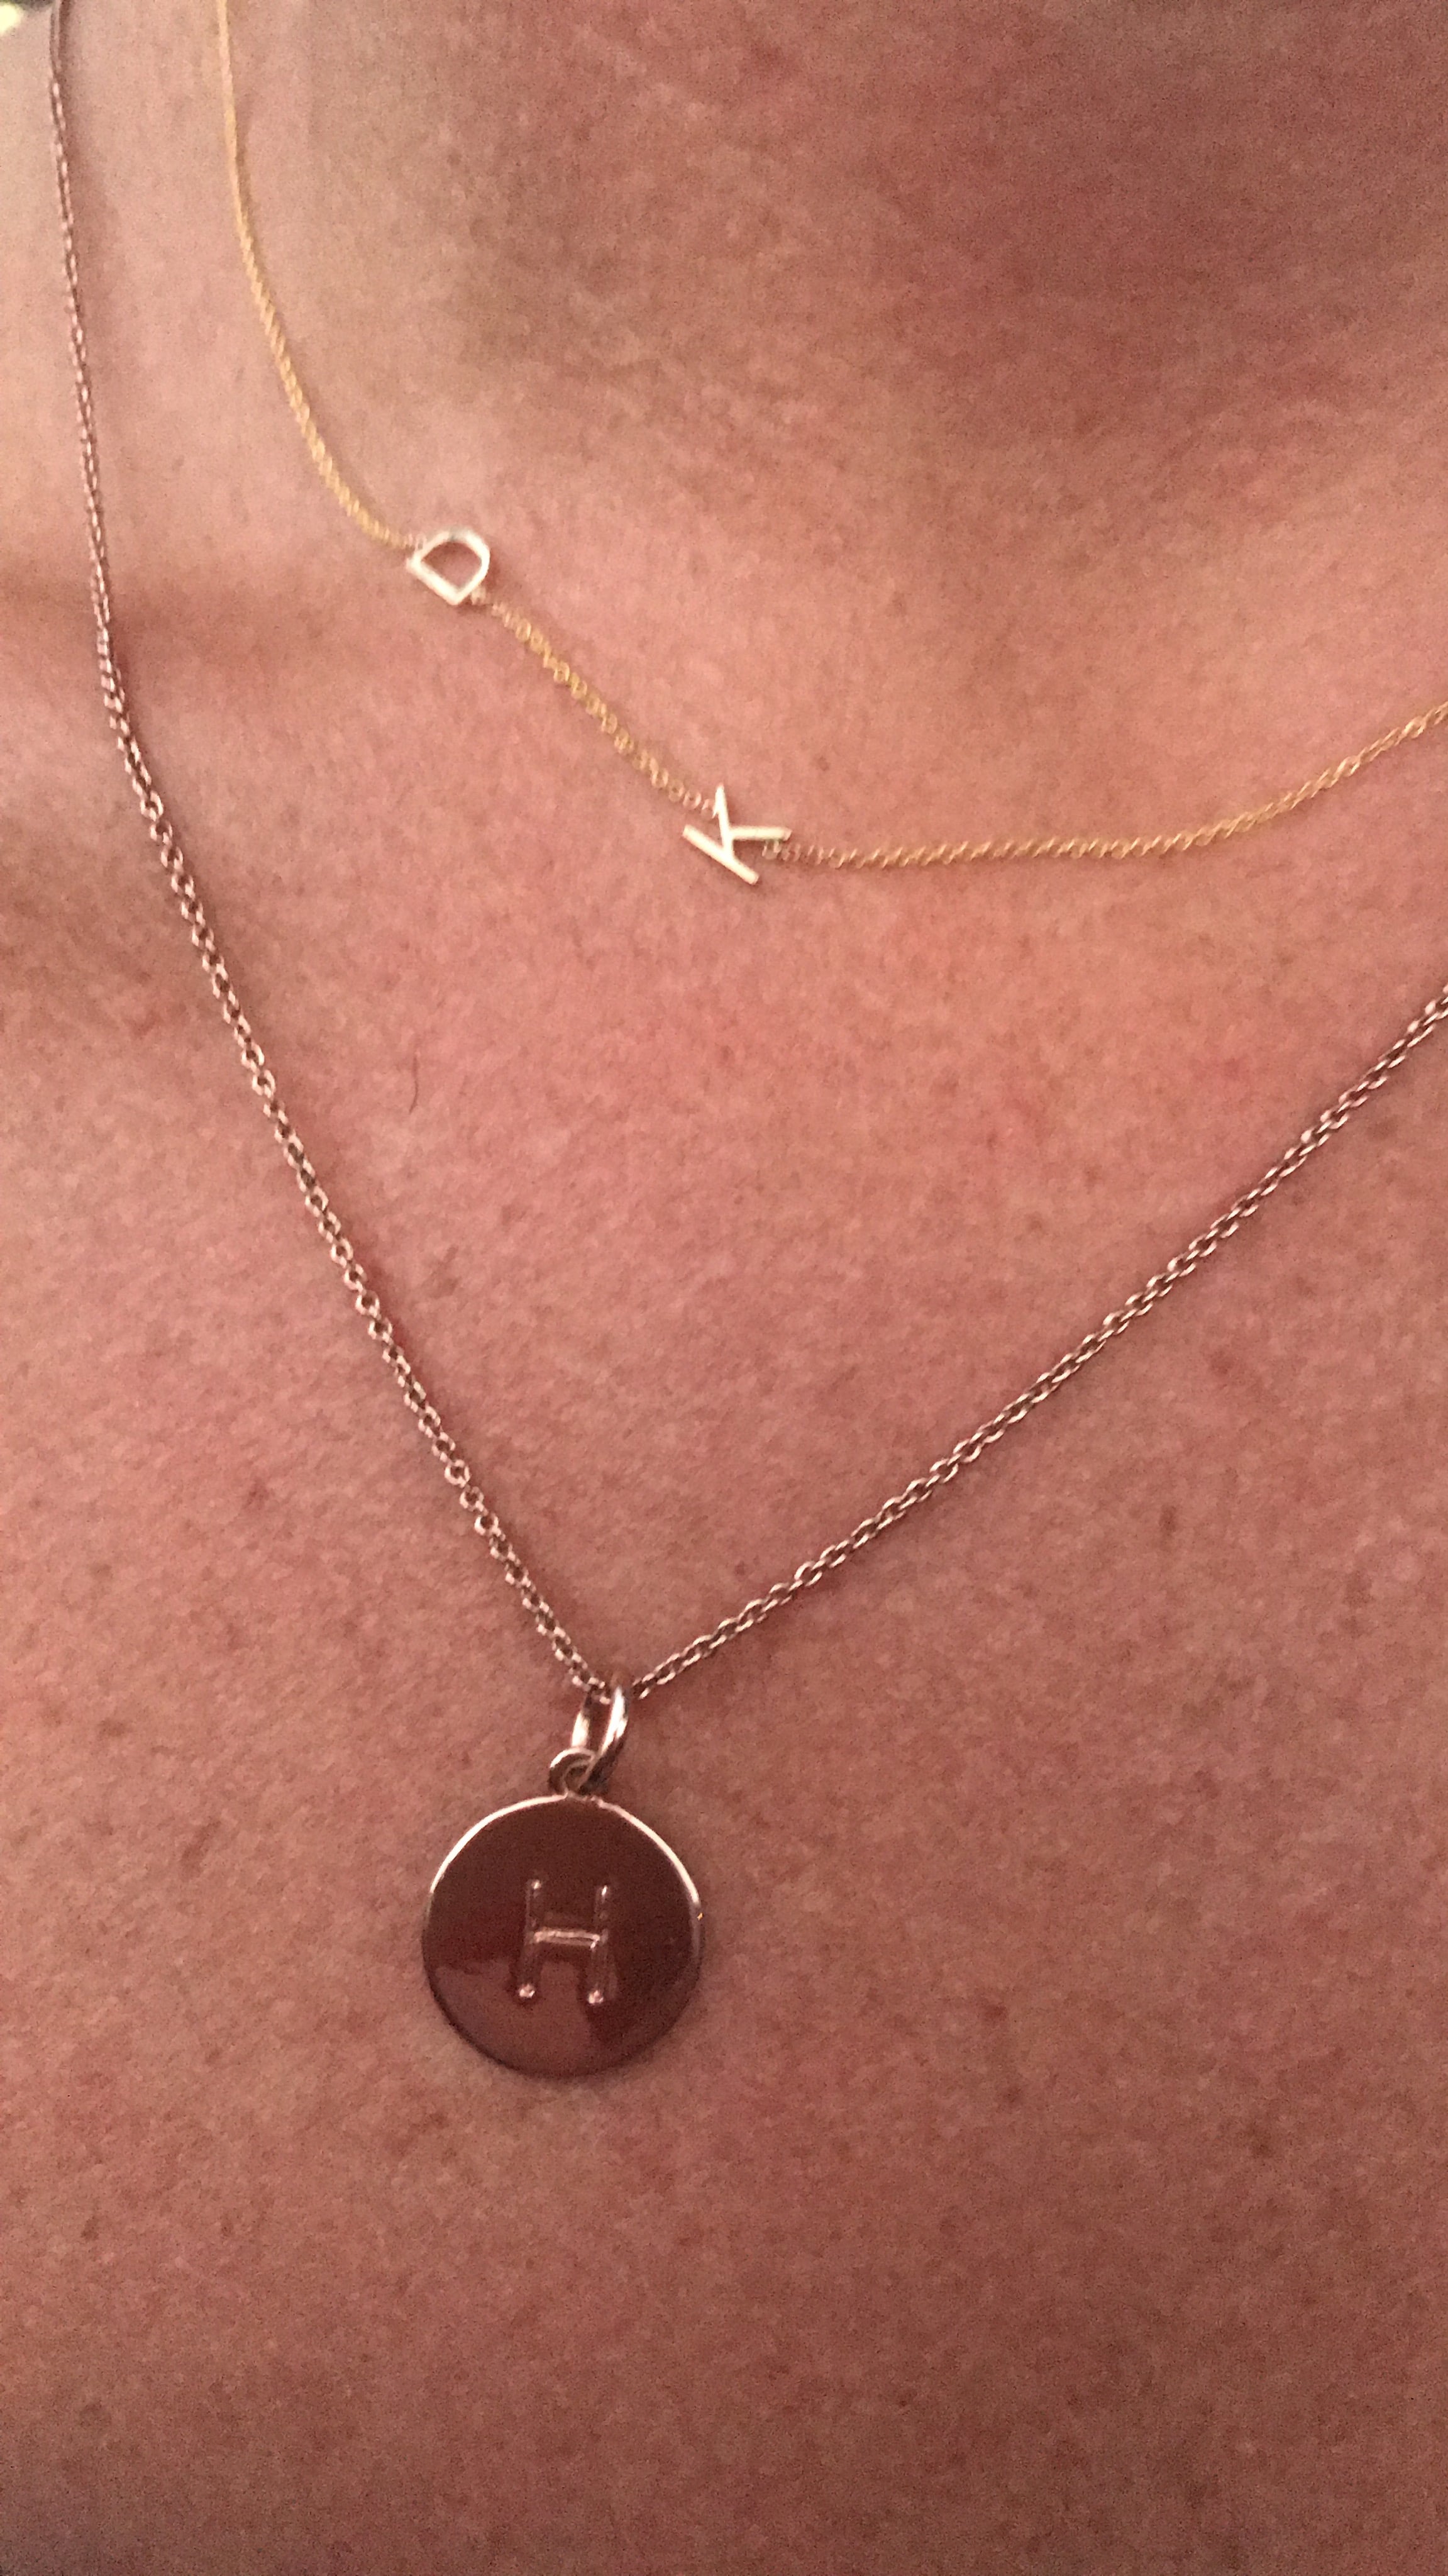 Is A Maya Brenner Necklace Worth It? - Sharing my thoughts on the Maya Brenner initial necklace and if it's worth the investment! | Maya Brenner - Maya Brenner Jewelry - Maya Brenner Initial Necklace - Maya Brenner Designs